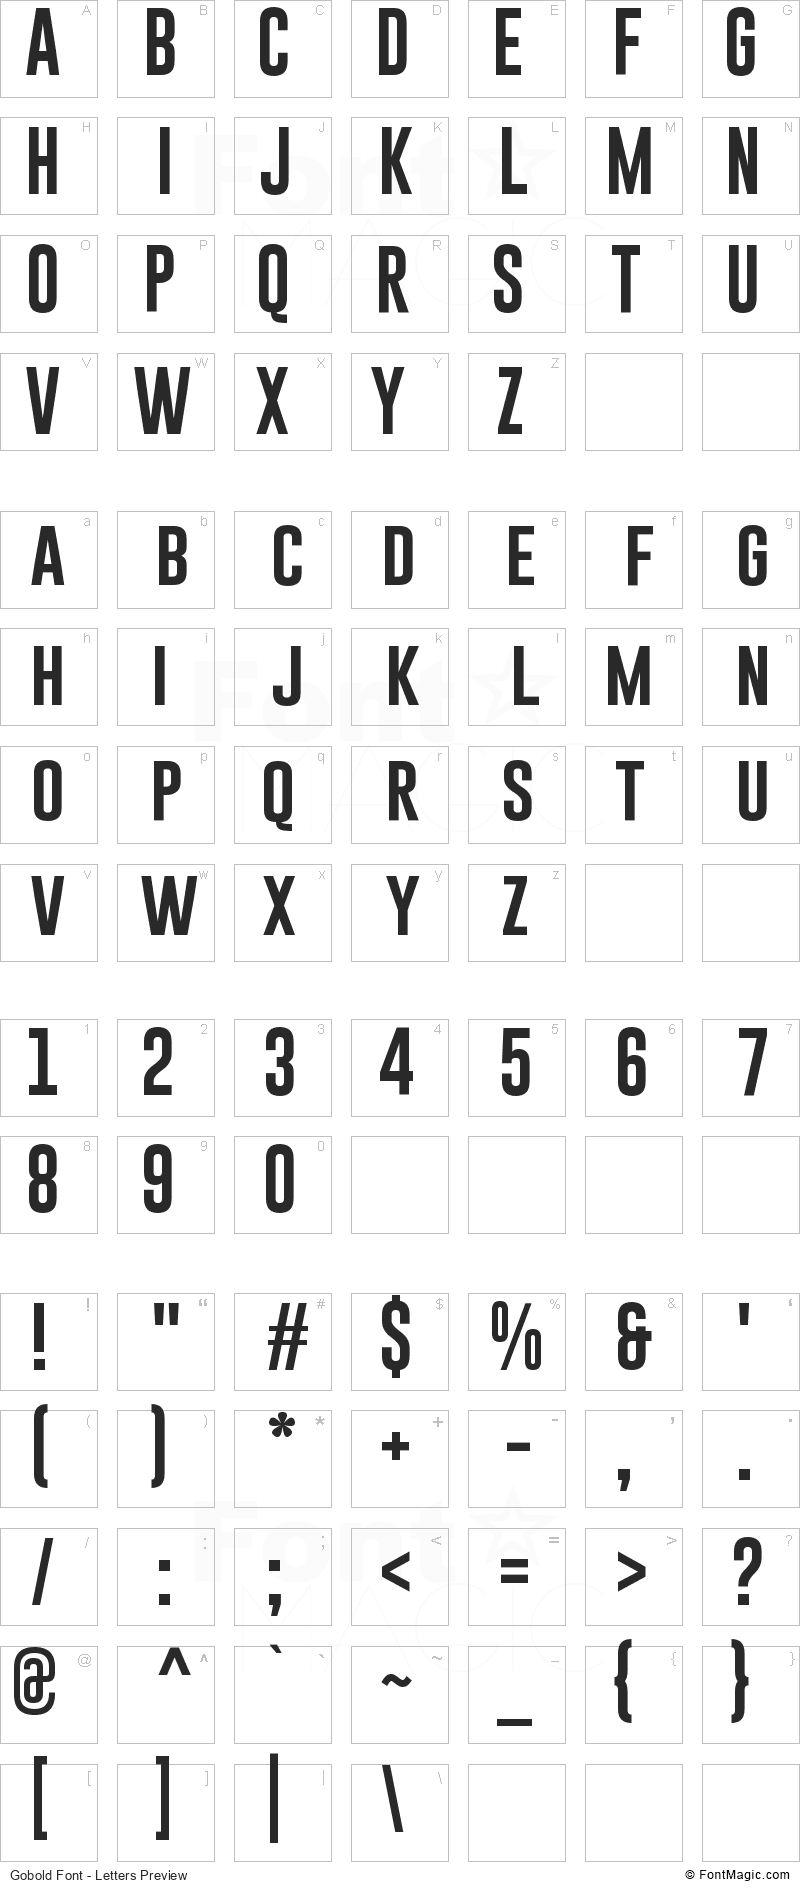 Gobold Font - All Latters Preview Chart